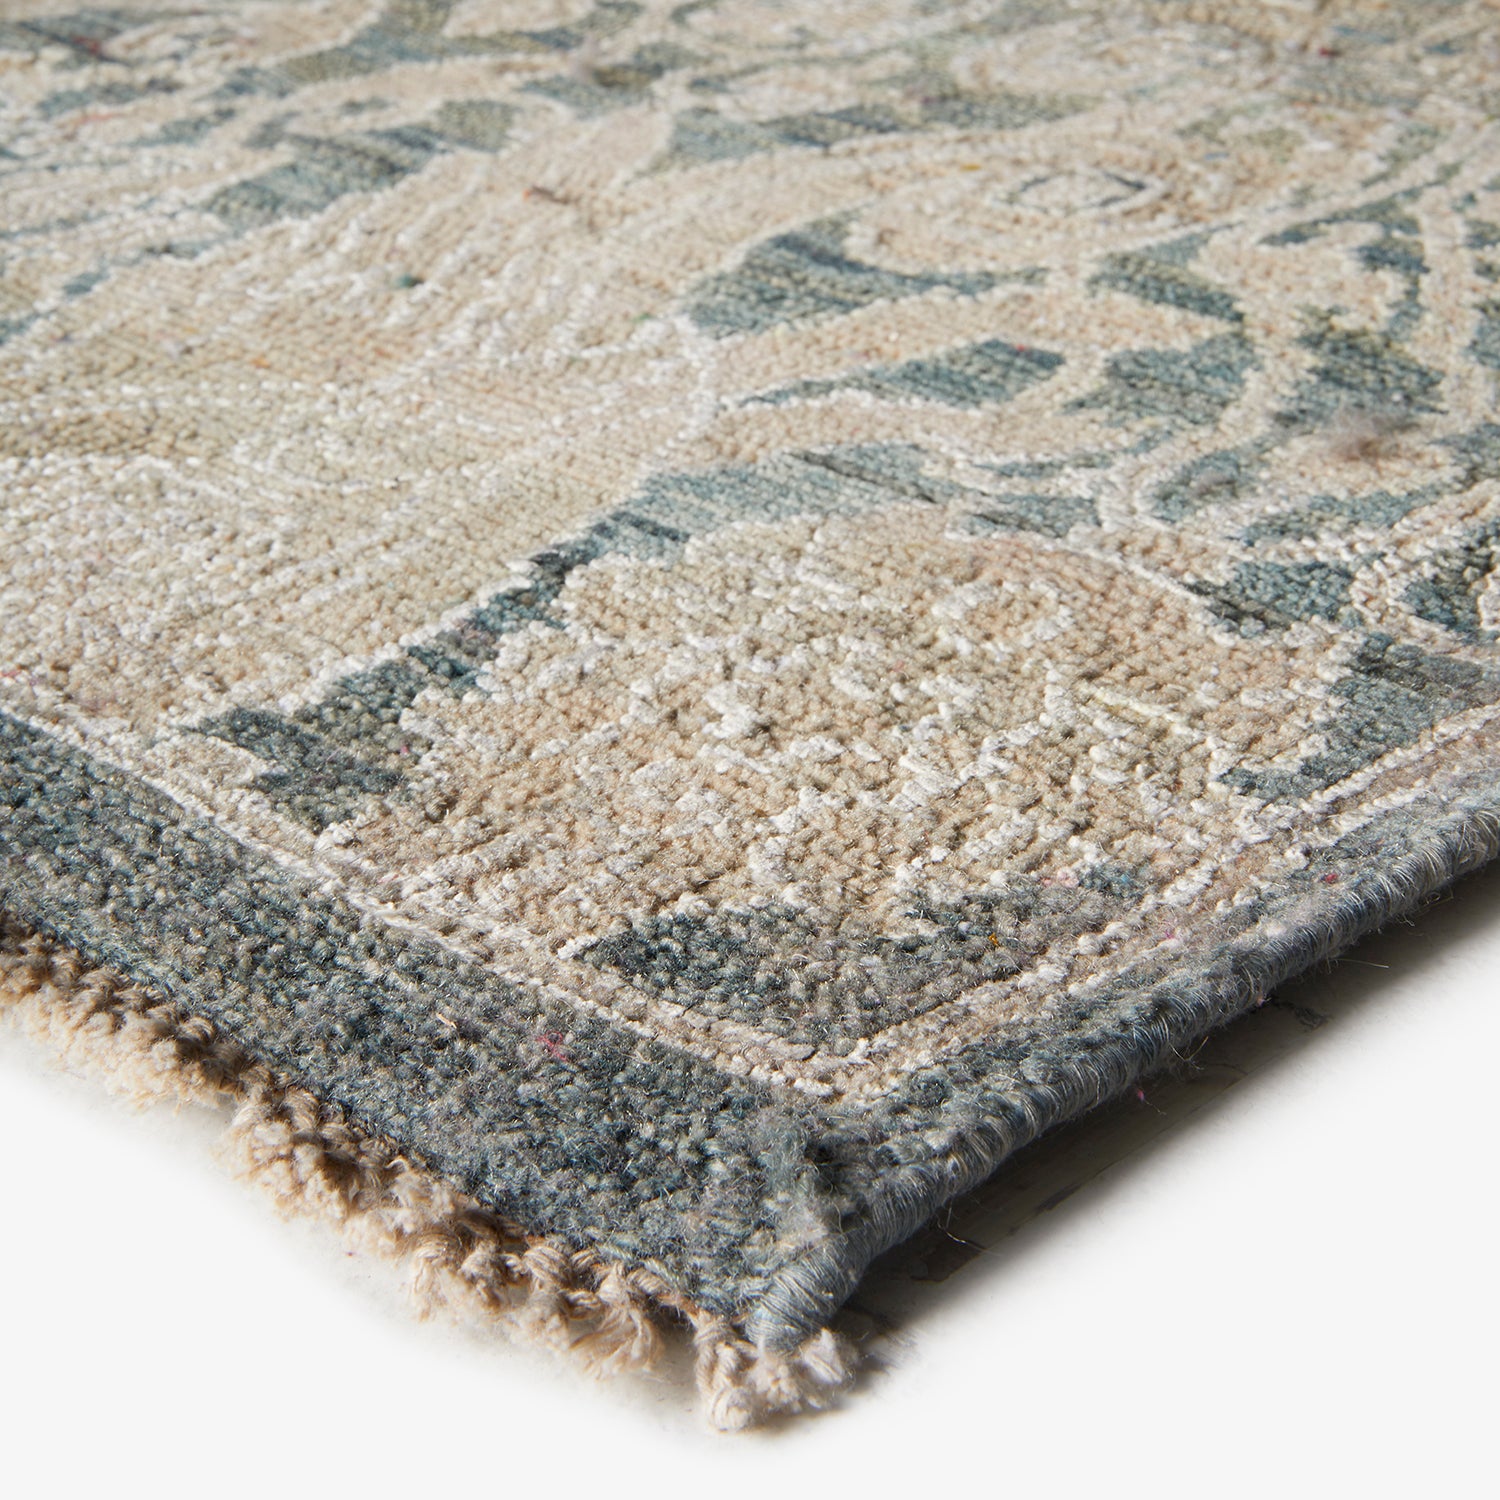 Close-up of a high-quality beige and blue patterned carpet.